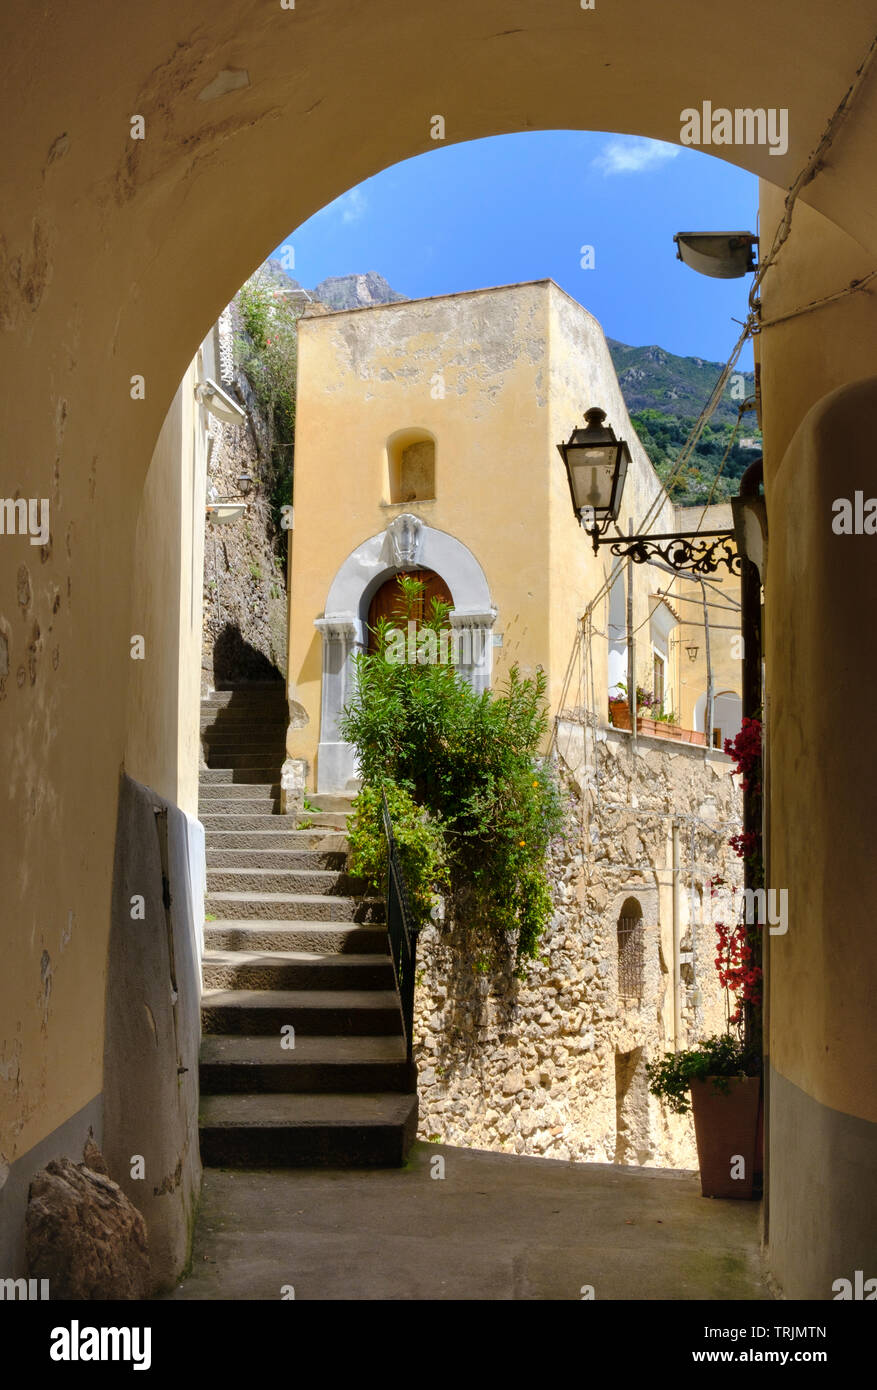 Traditional colourful Italian houses steep steps, arches  and narrow alleys typical of Positano on the Amalfi Coast of Campania in Southern Italy Stock Photo